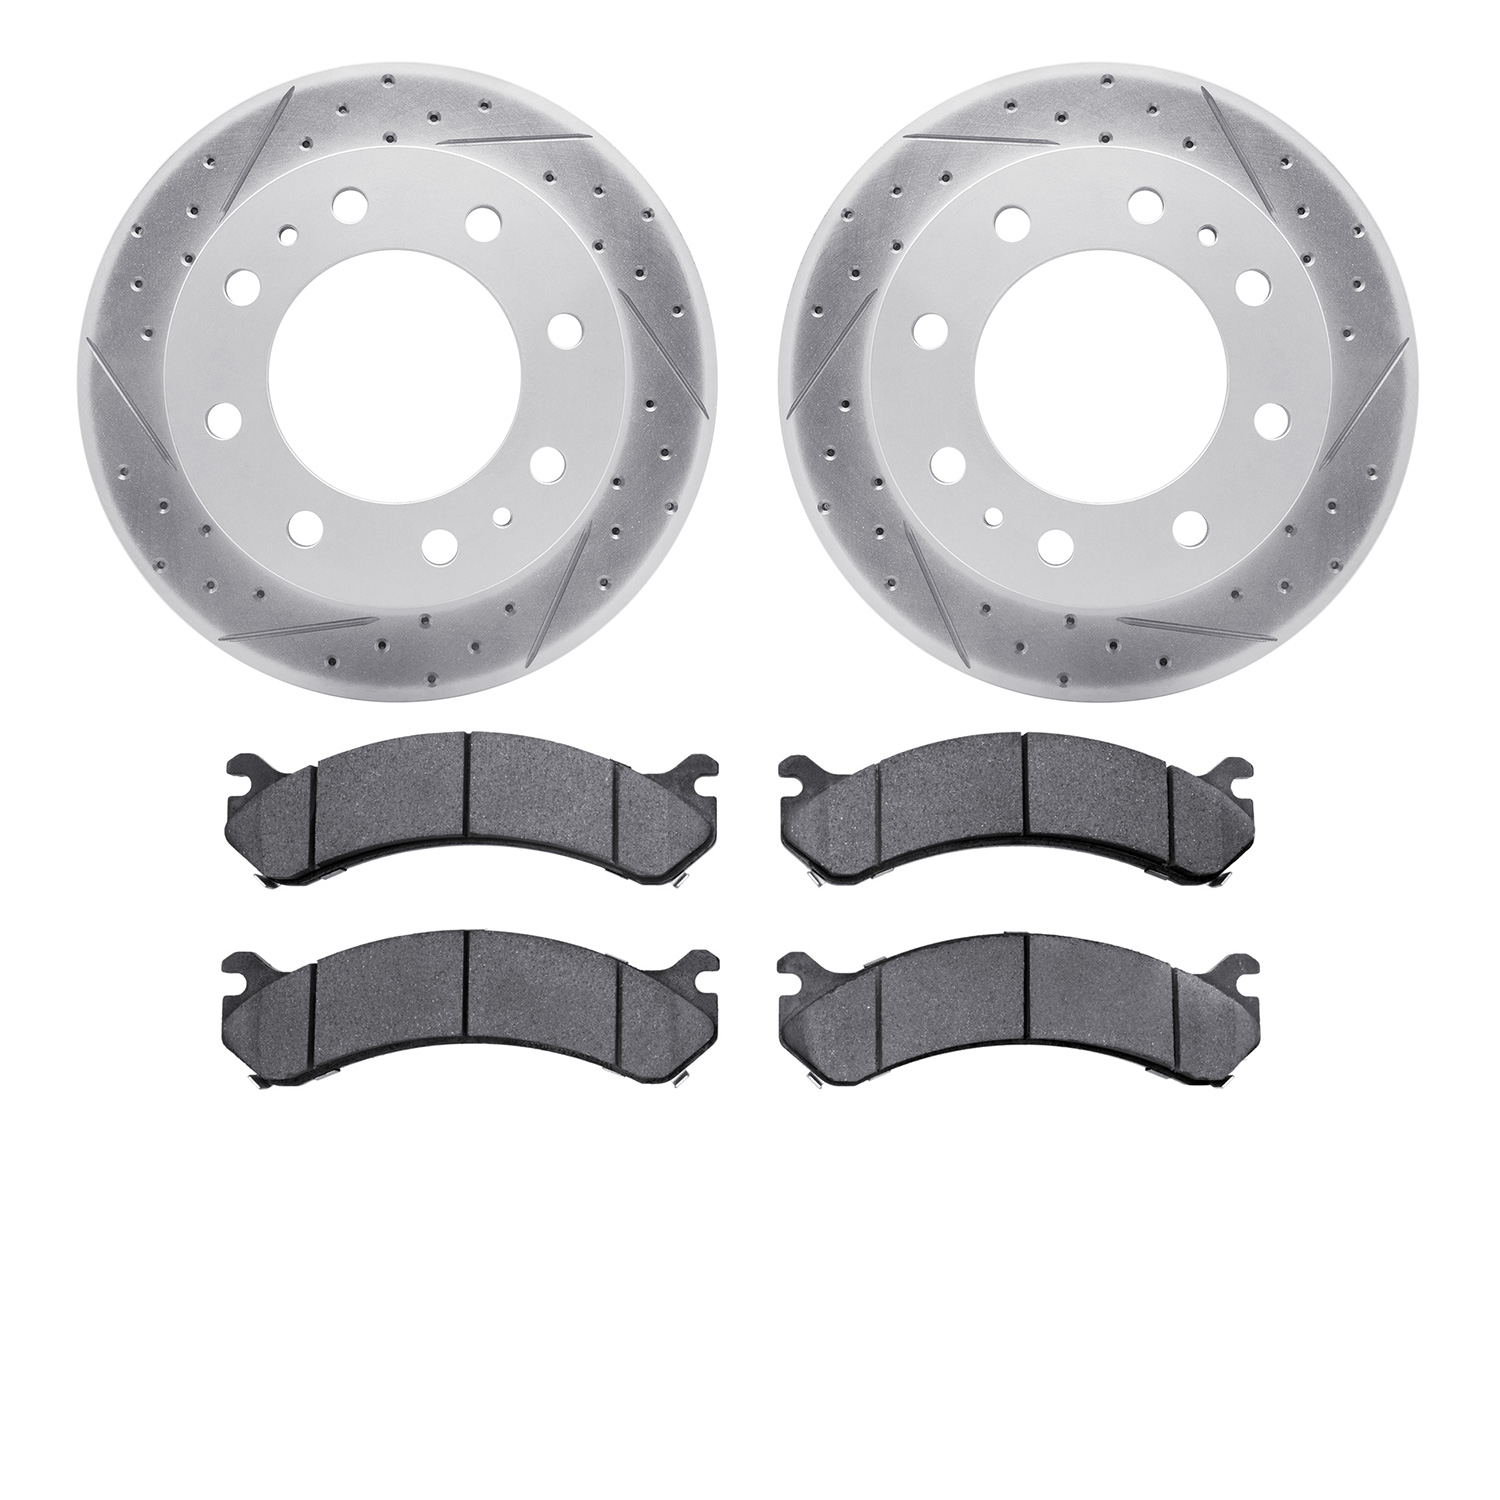 2402-48014 Geoperformance Drilled/Slotted Brake Rotors with Ultimate-Duty Brake Pads Kit, 1999-2020 GM, Position: Front